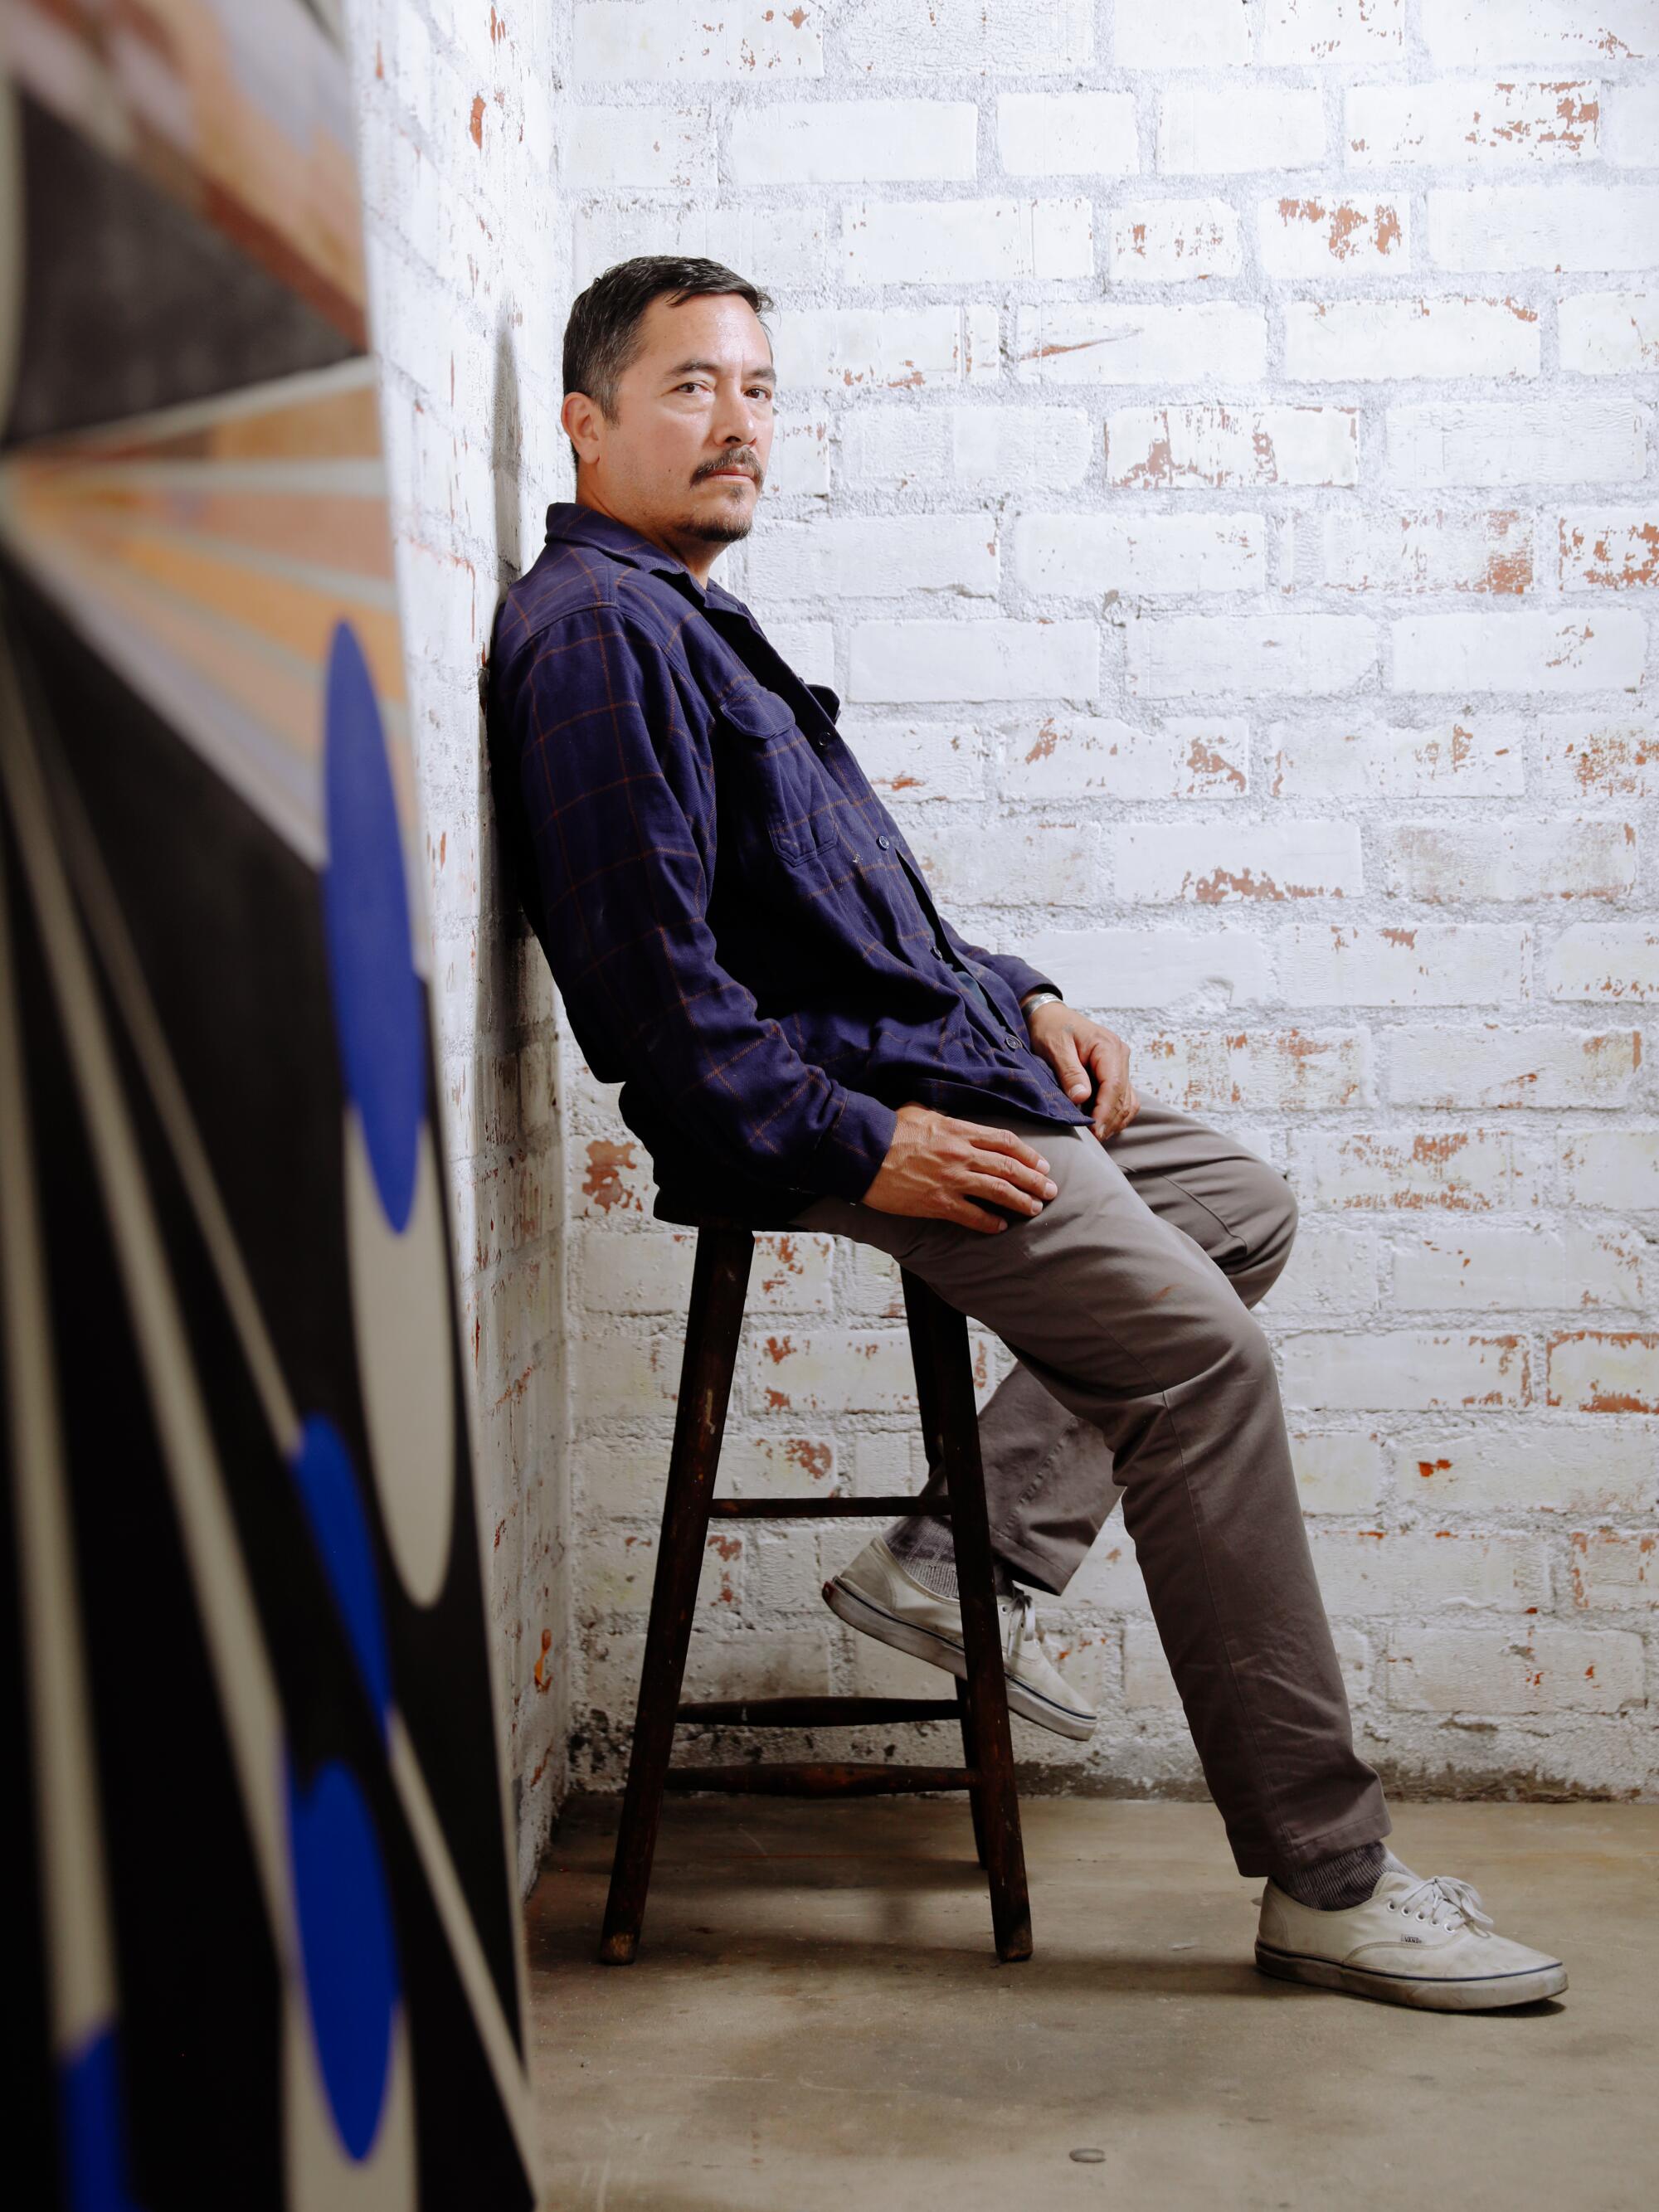 Eamon Ore-Giron sits on a bench while leaning against a wall in his studio in Los Angeles.